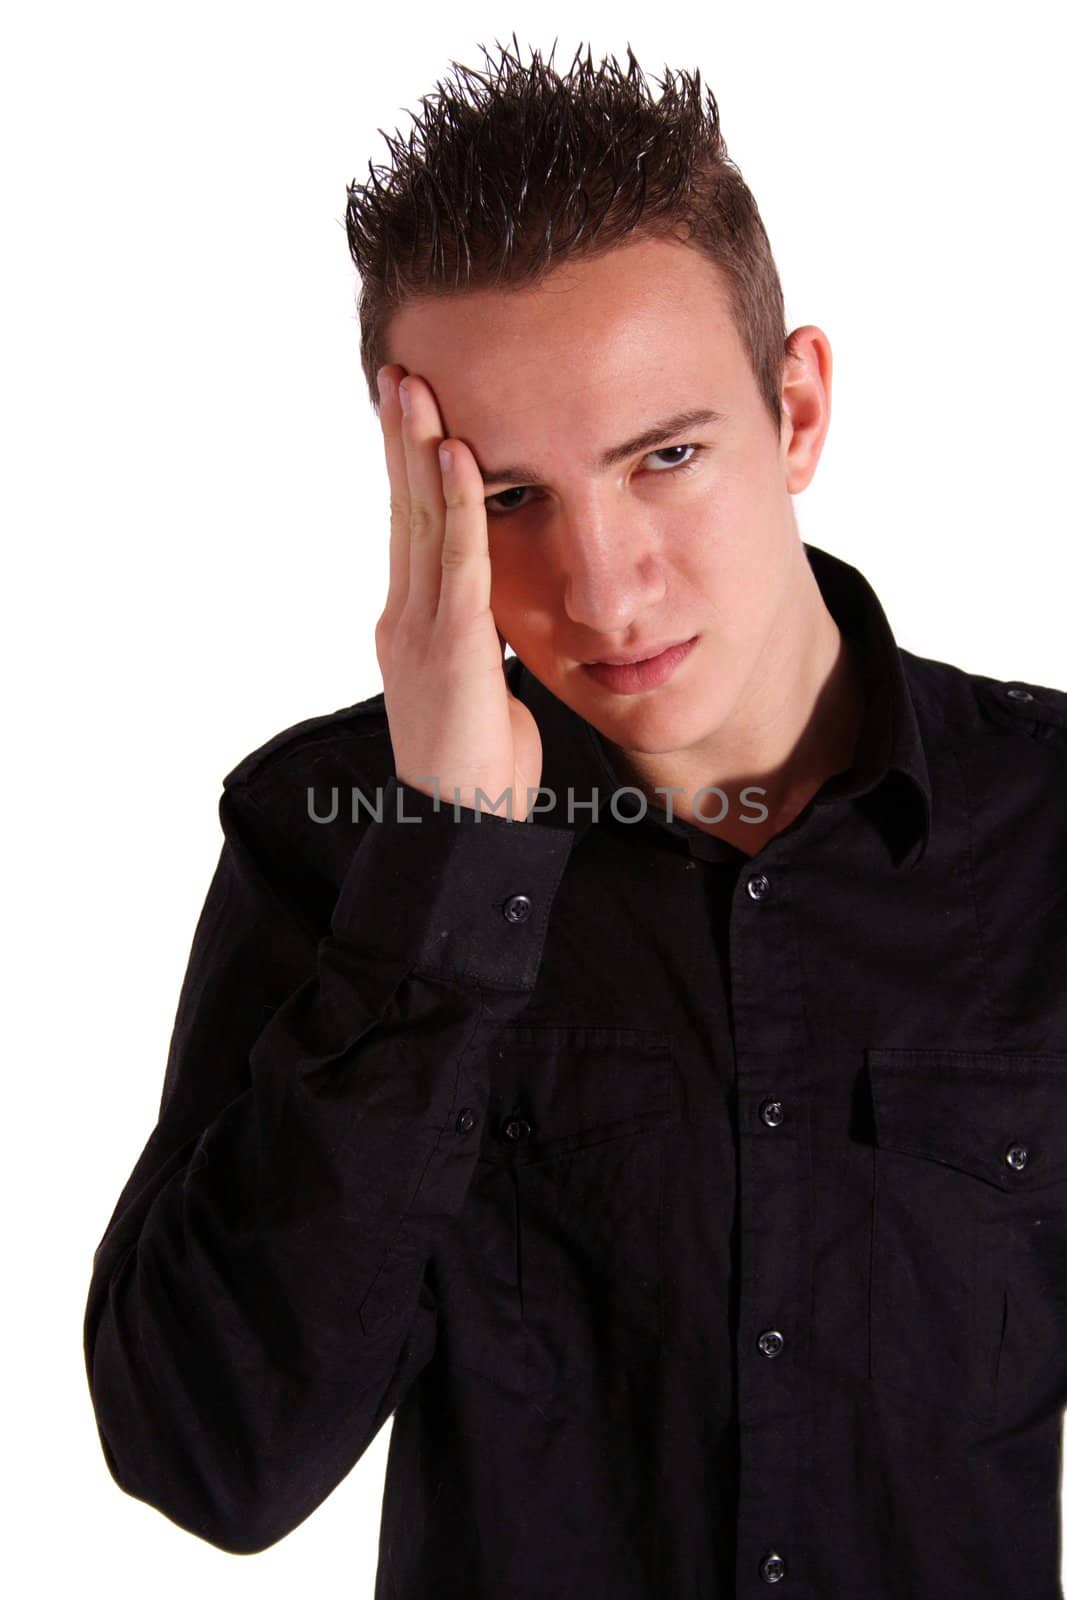 A young man suffers from migraine. All isolated on white background.